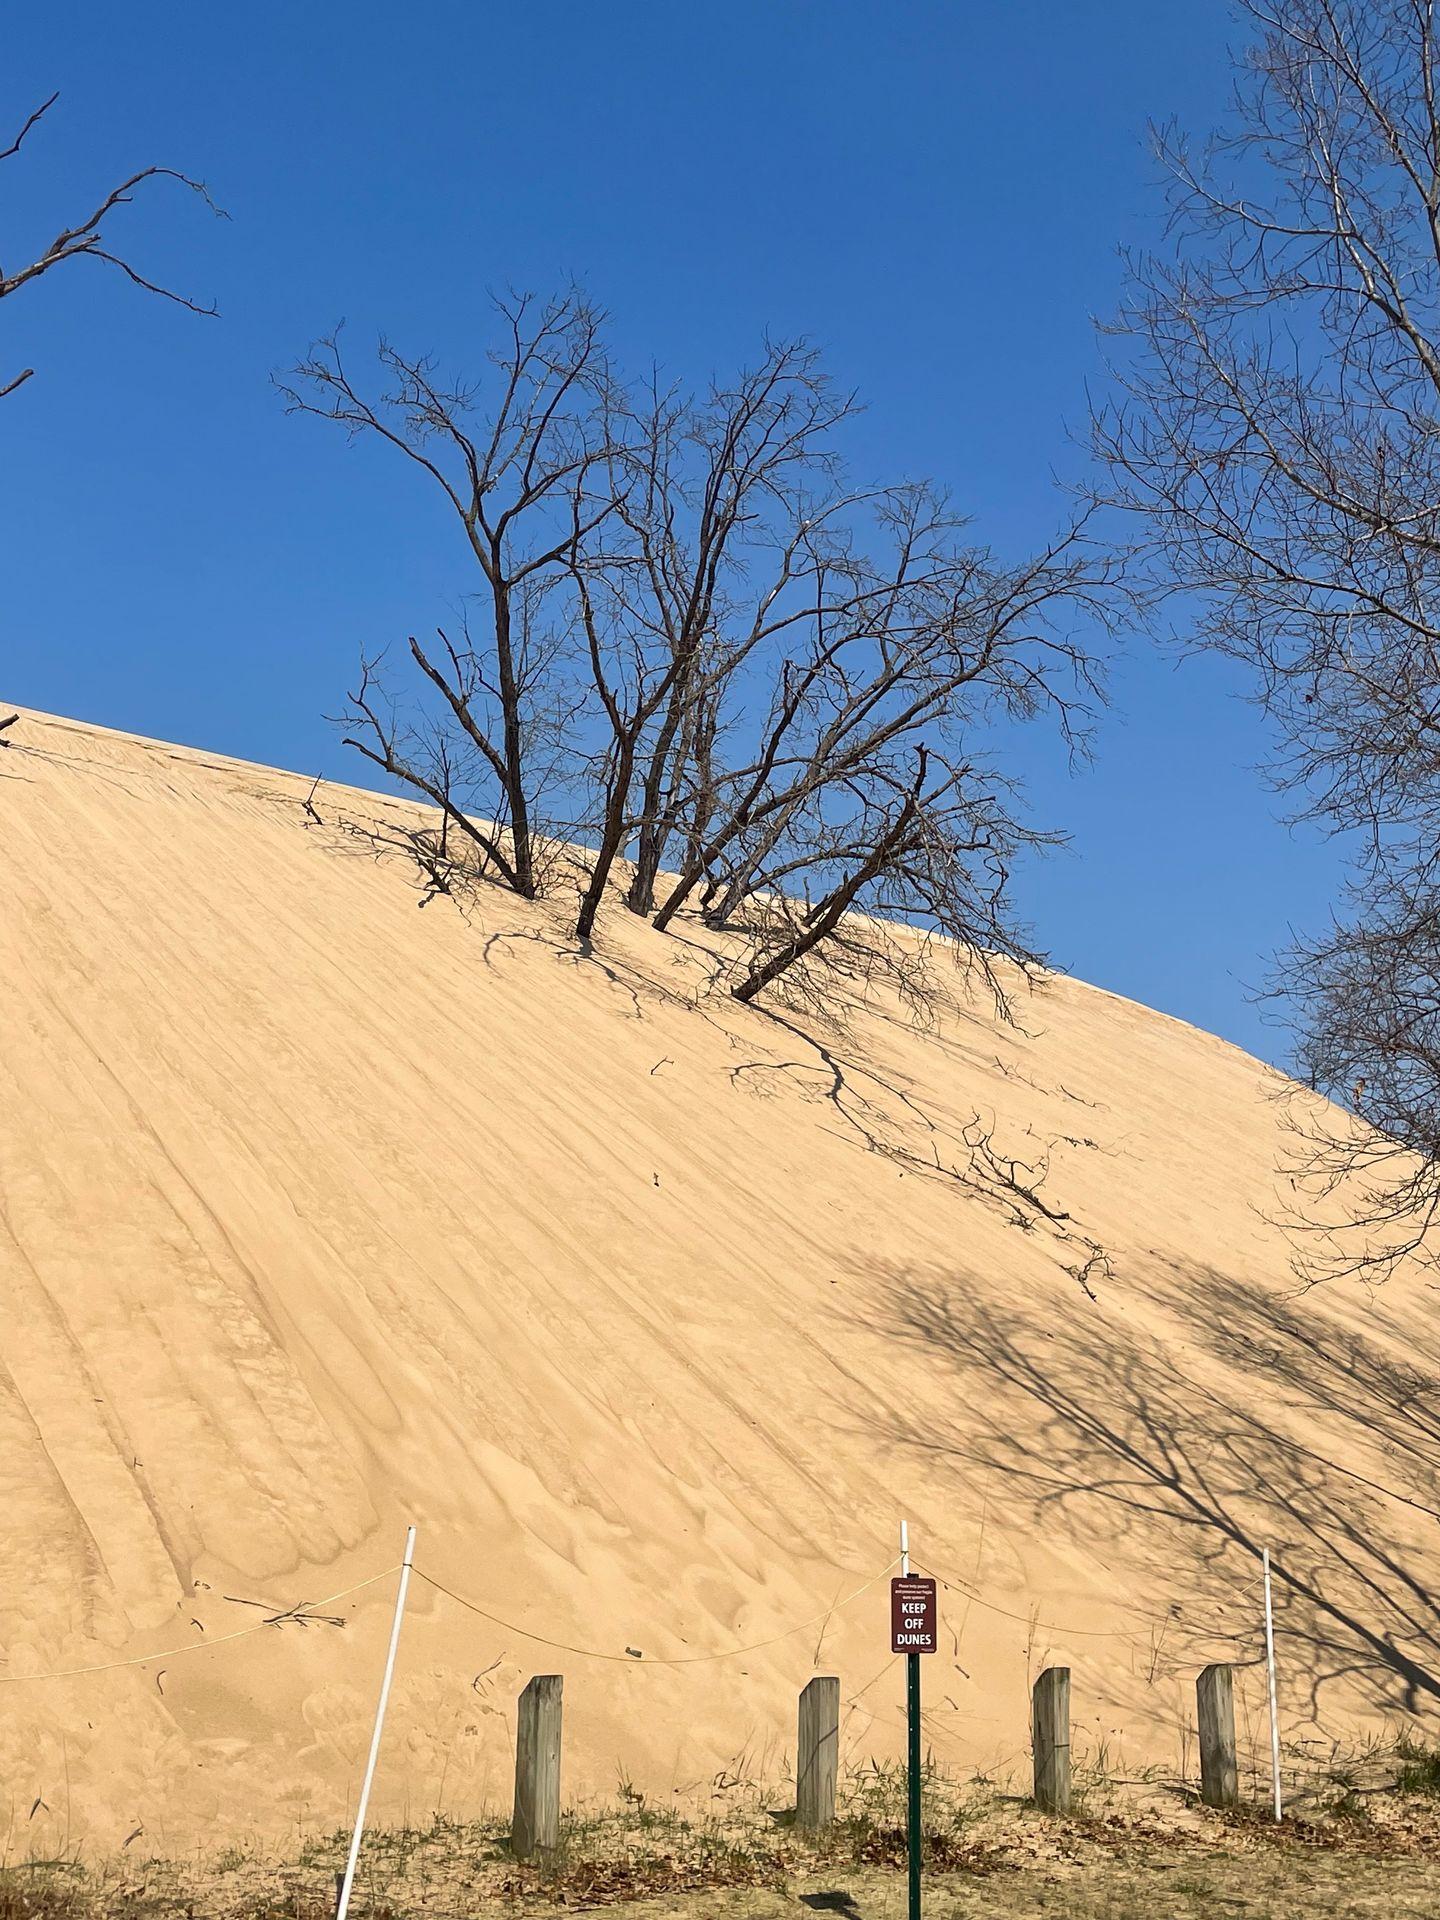 A tall sand dune that has swallowed up some trees.